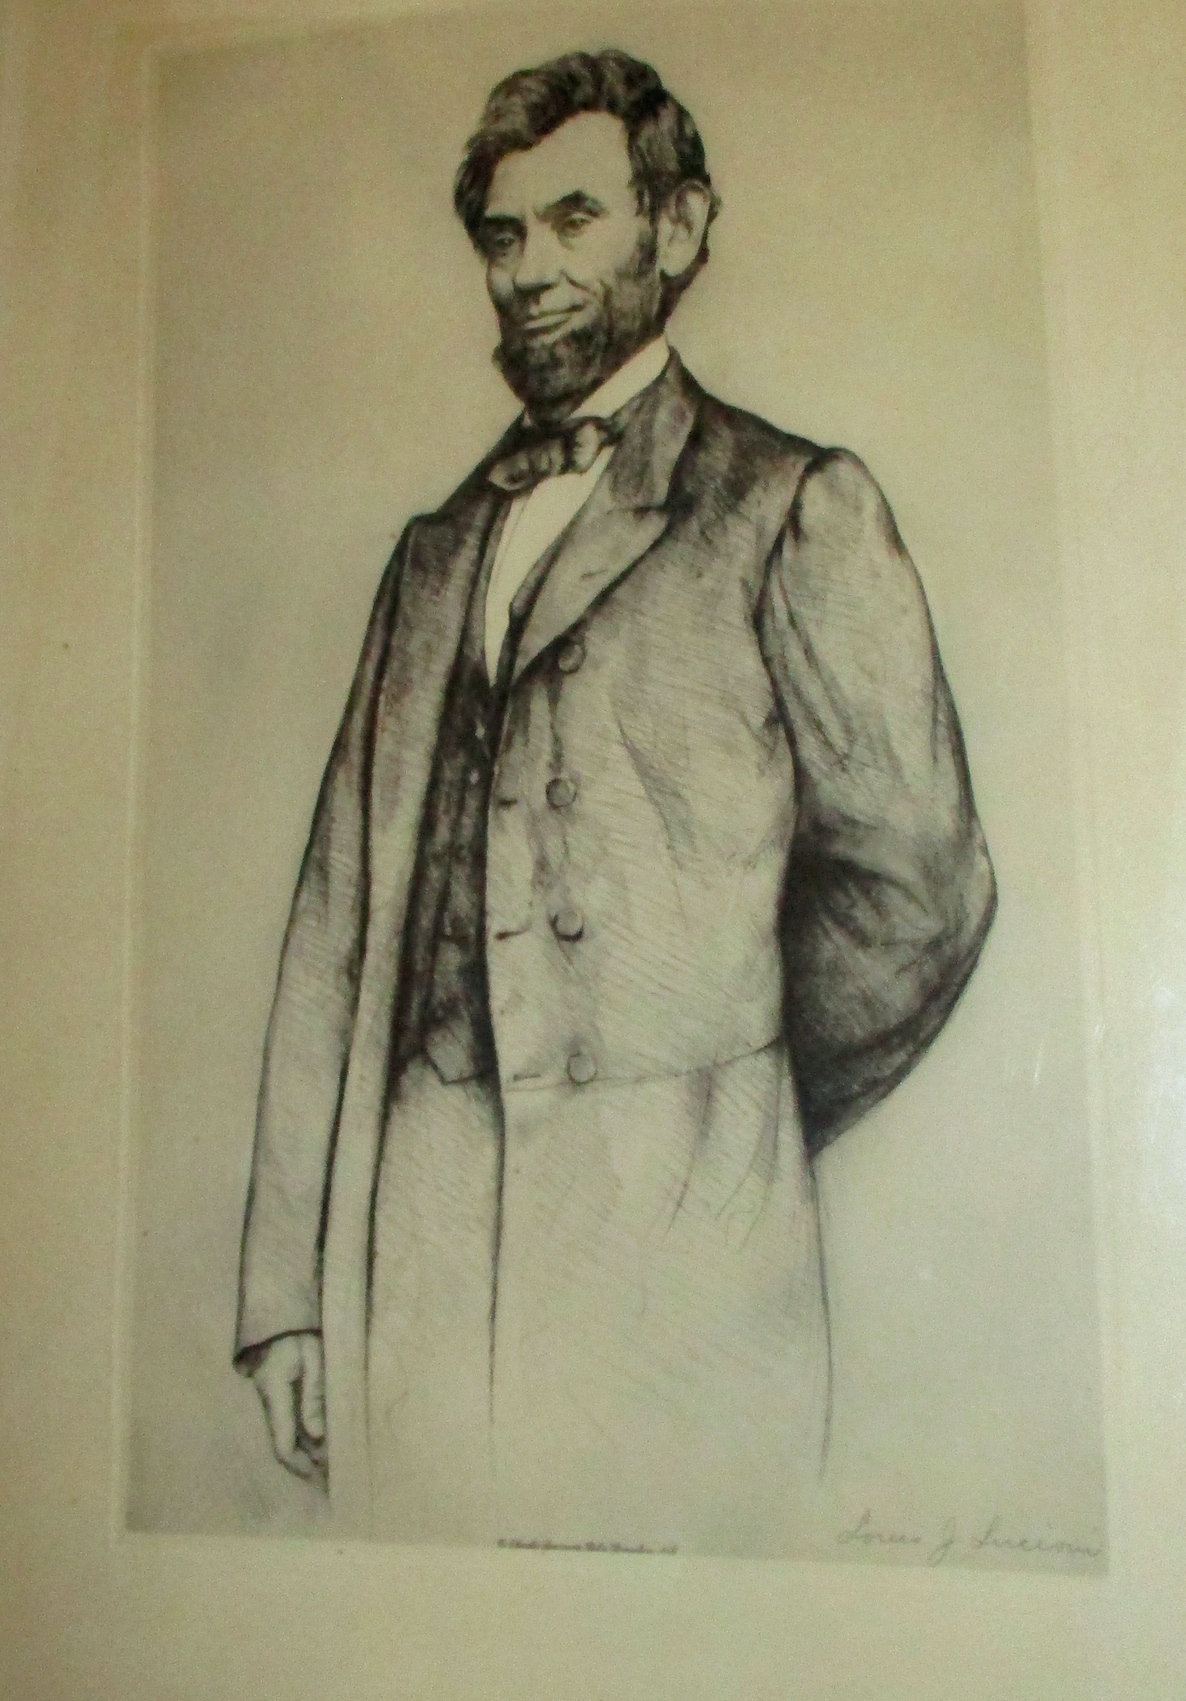 Dry Point Etching of Abraham Lincoln signed Louis J. Lucioni (as Luigi Lucioni signed his earliest prints) in Lucioni's hand (in pencil) bottom mid - within platemark: etched copyright Charles Barmore PUBR. Princeton, N.J.